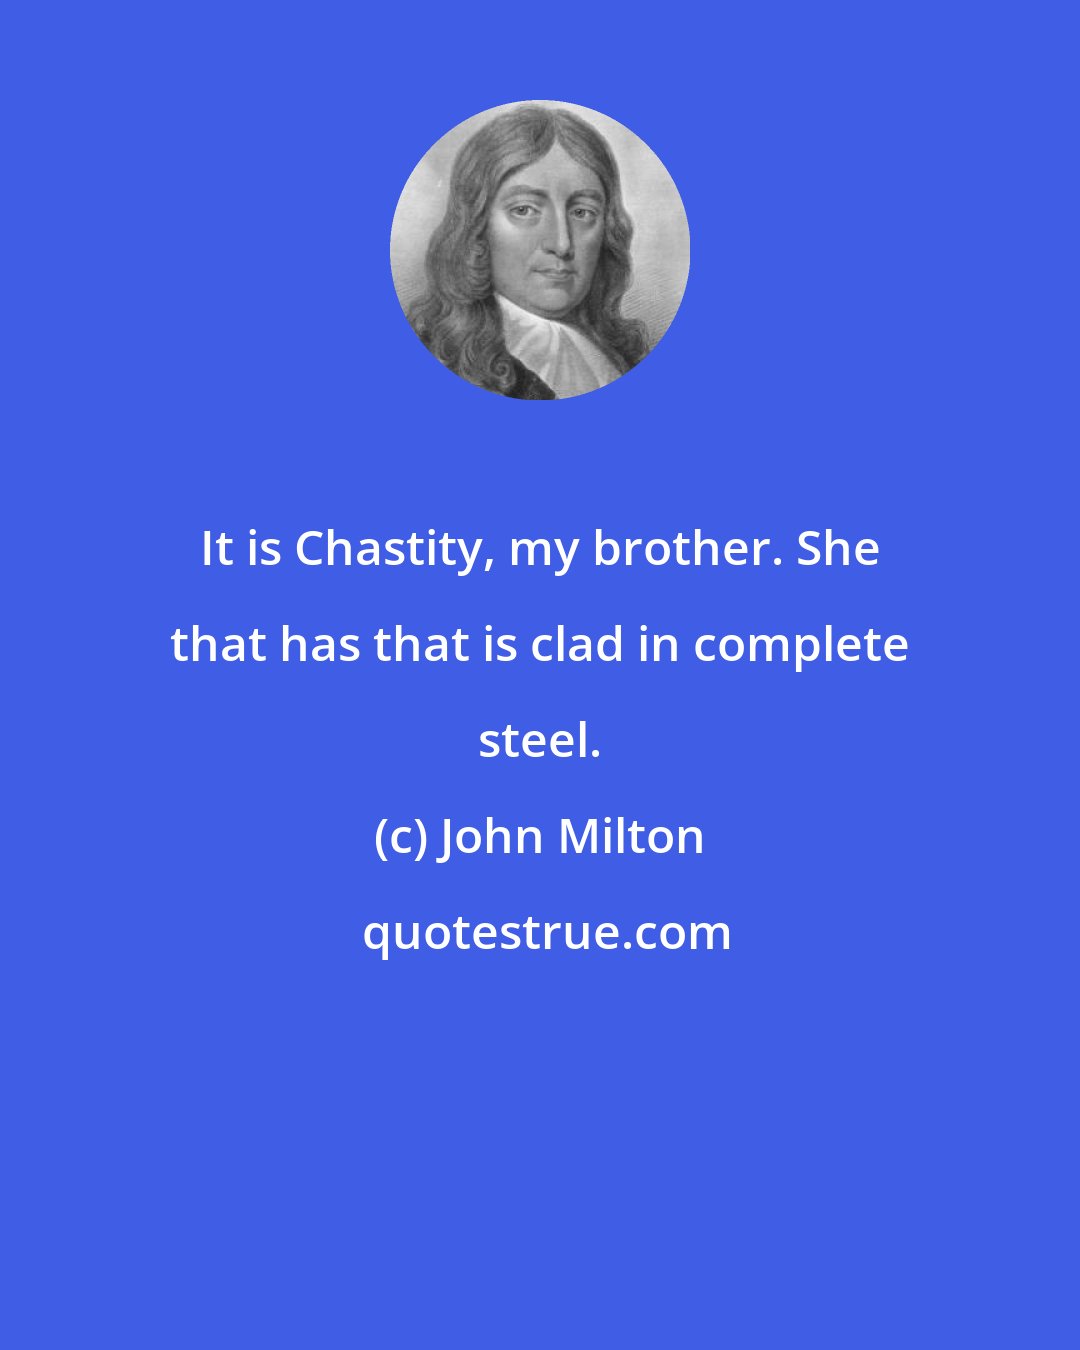 John Milton: It is Chastity, my brother. She that has that is clad in complete steel.